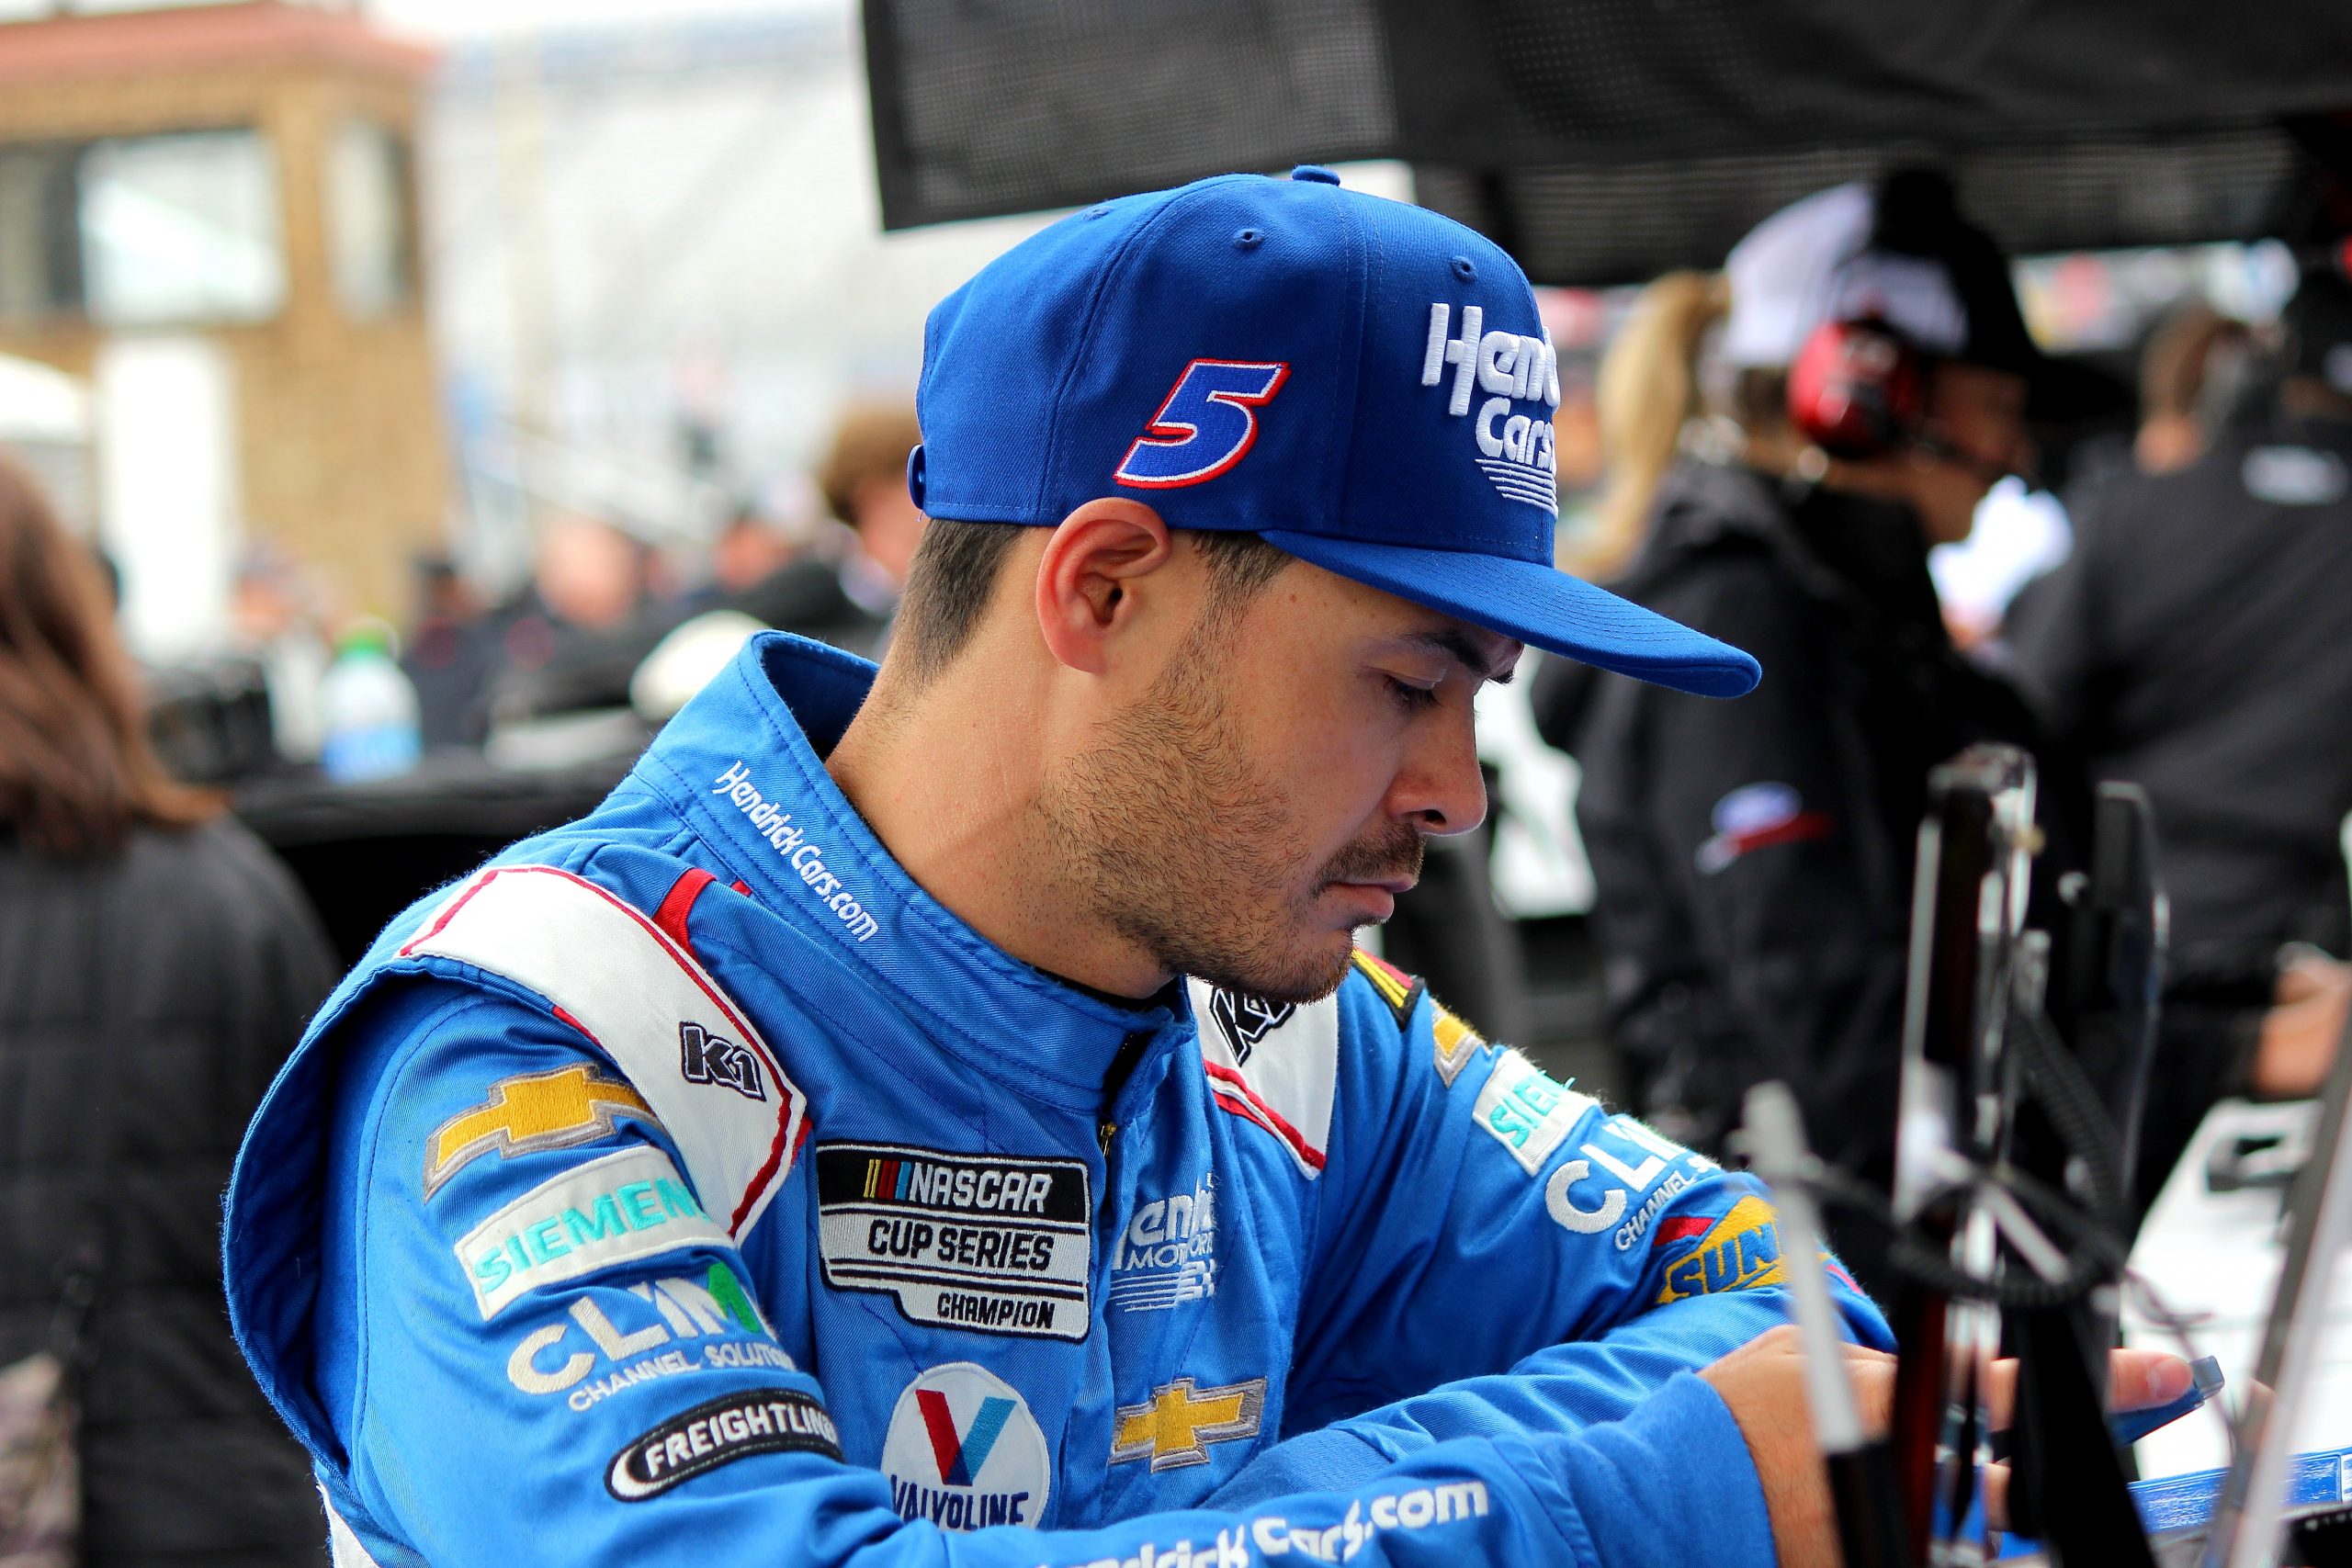 Kyle Larson has his work cut out for him starting in 18th. (Photo: Josh Jones | The Podium Finish)